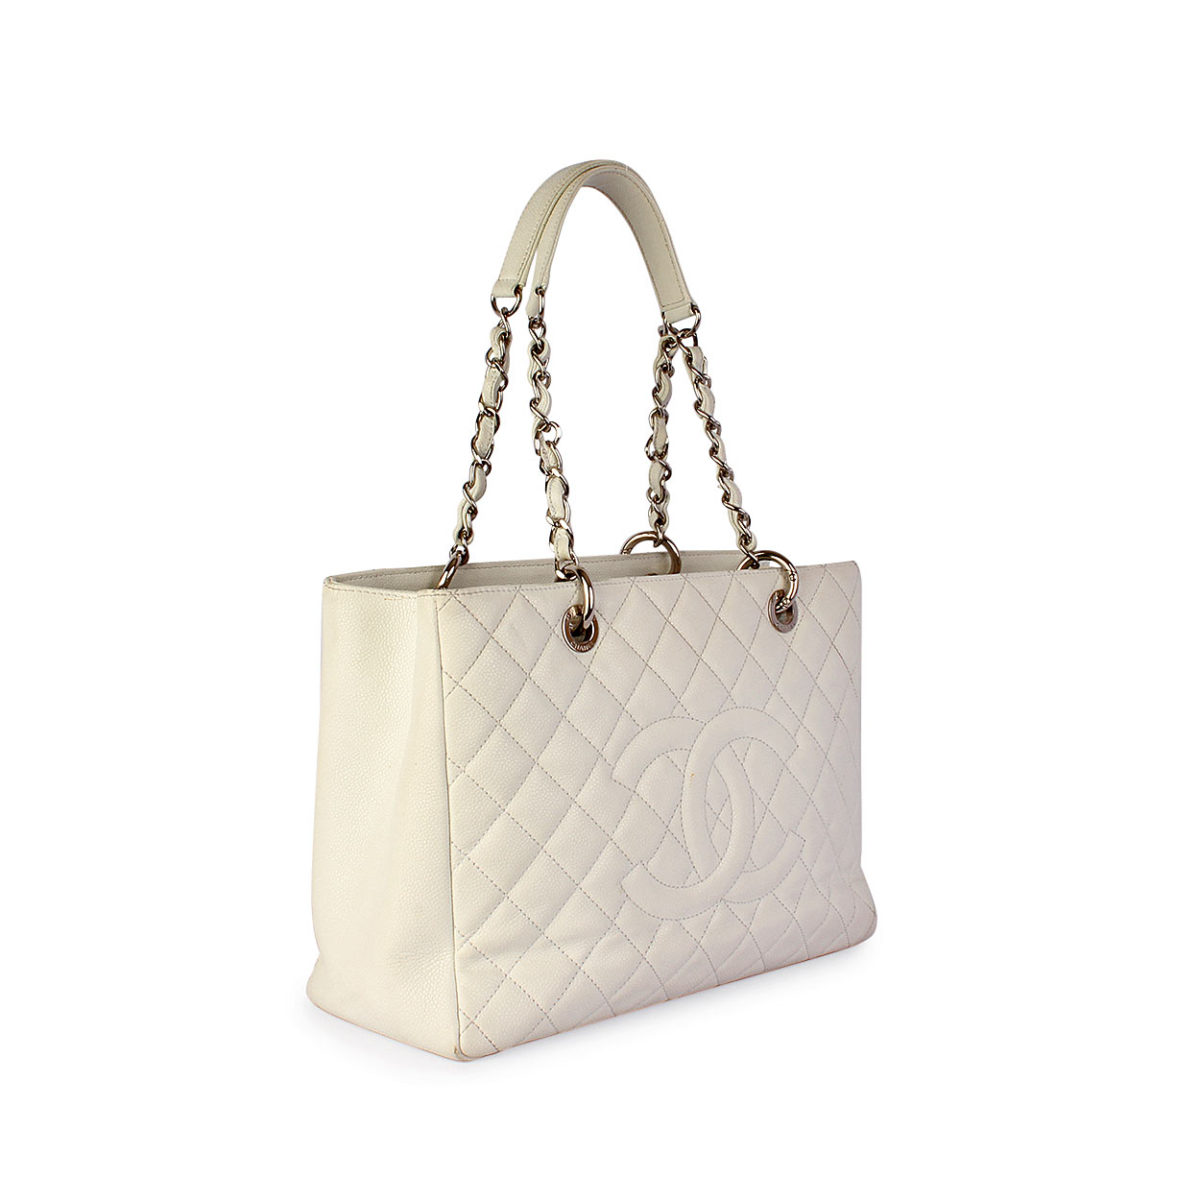 All White Chanel Bags :: Keweenaw Bay Indian Community